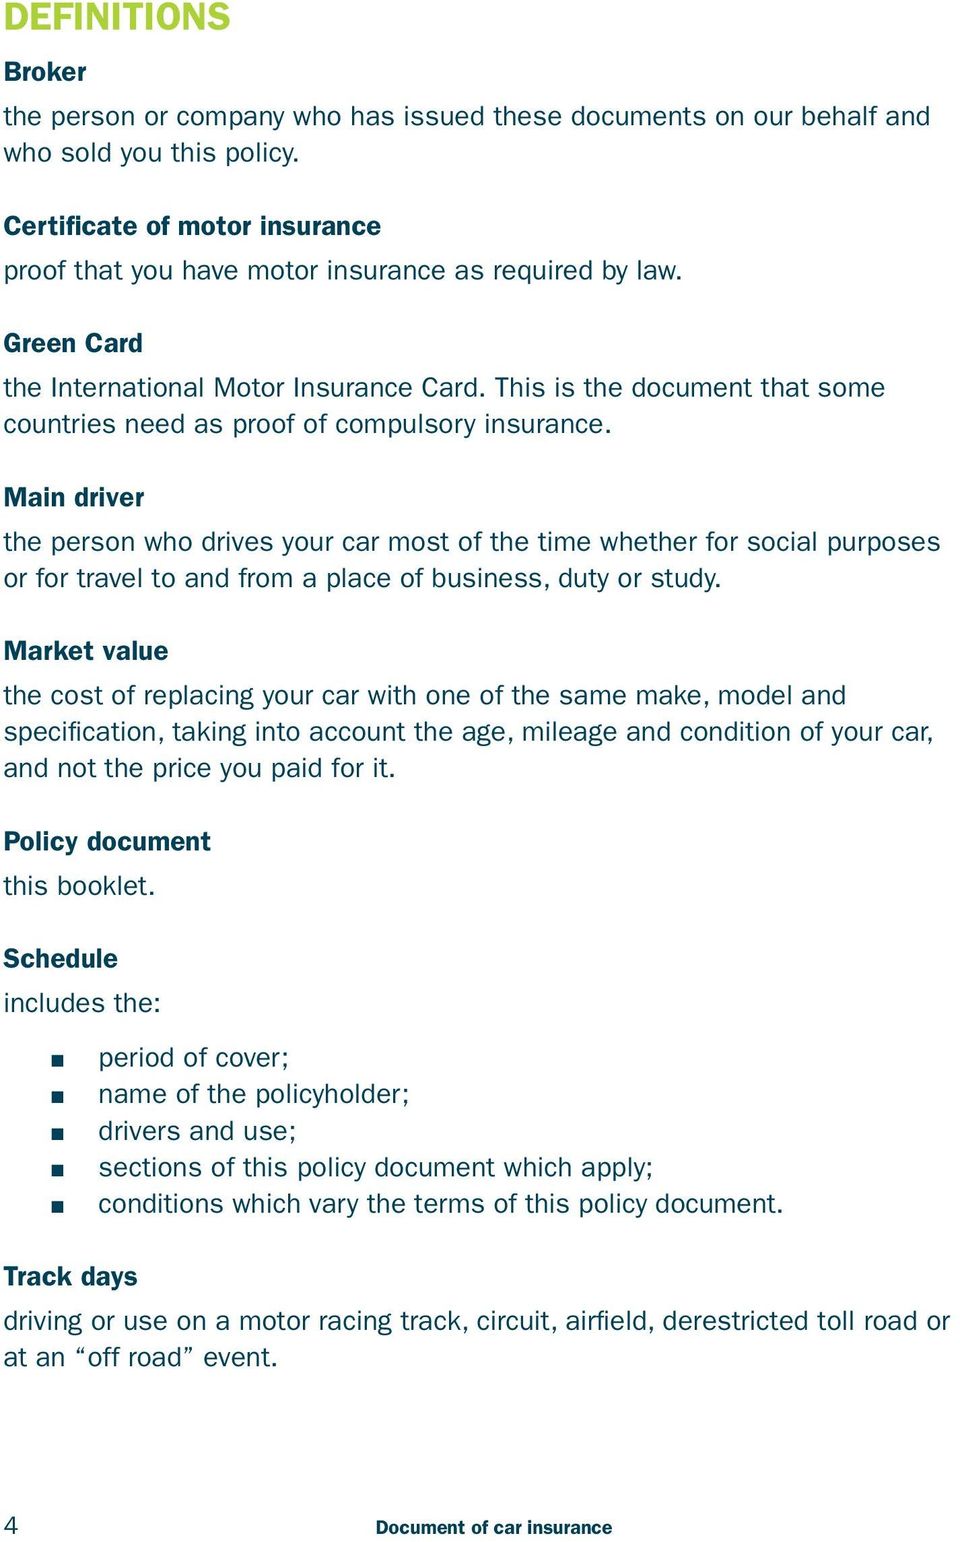 This is the document that some countries need as proof of compulsory insurance.